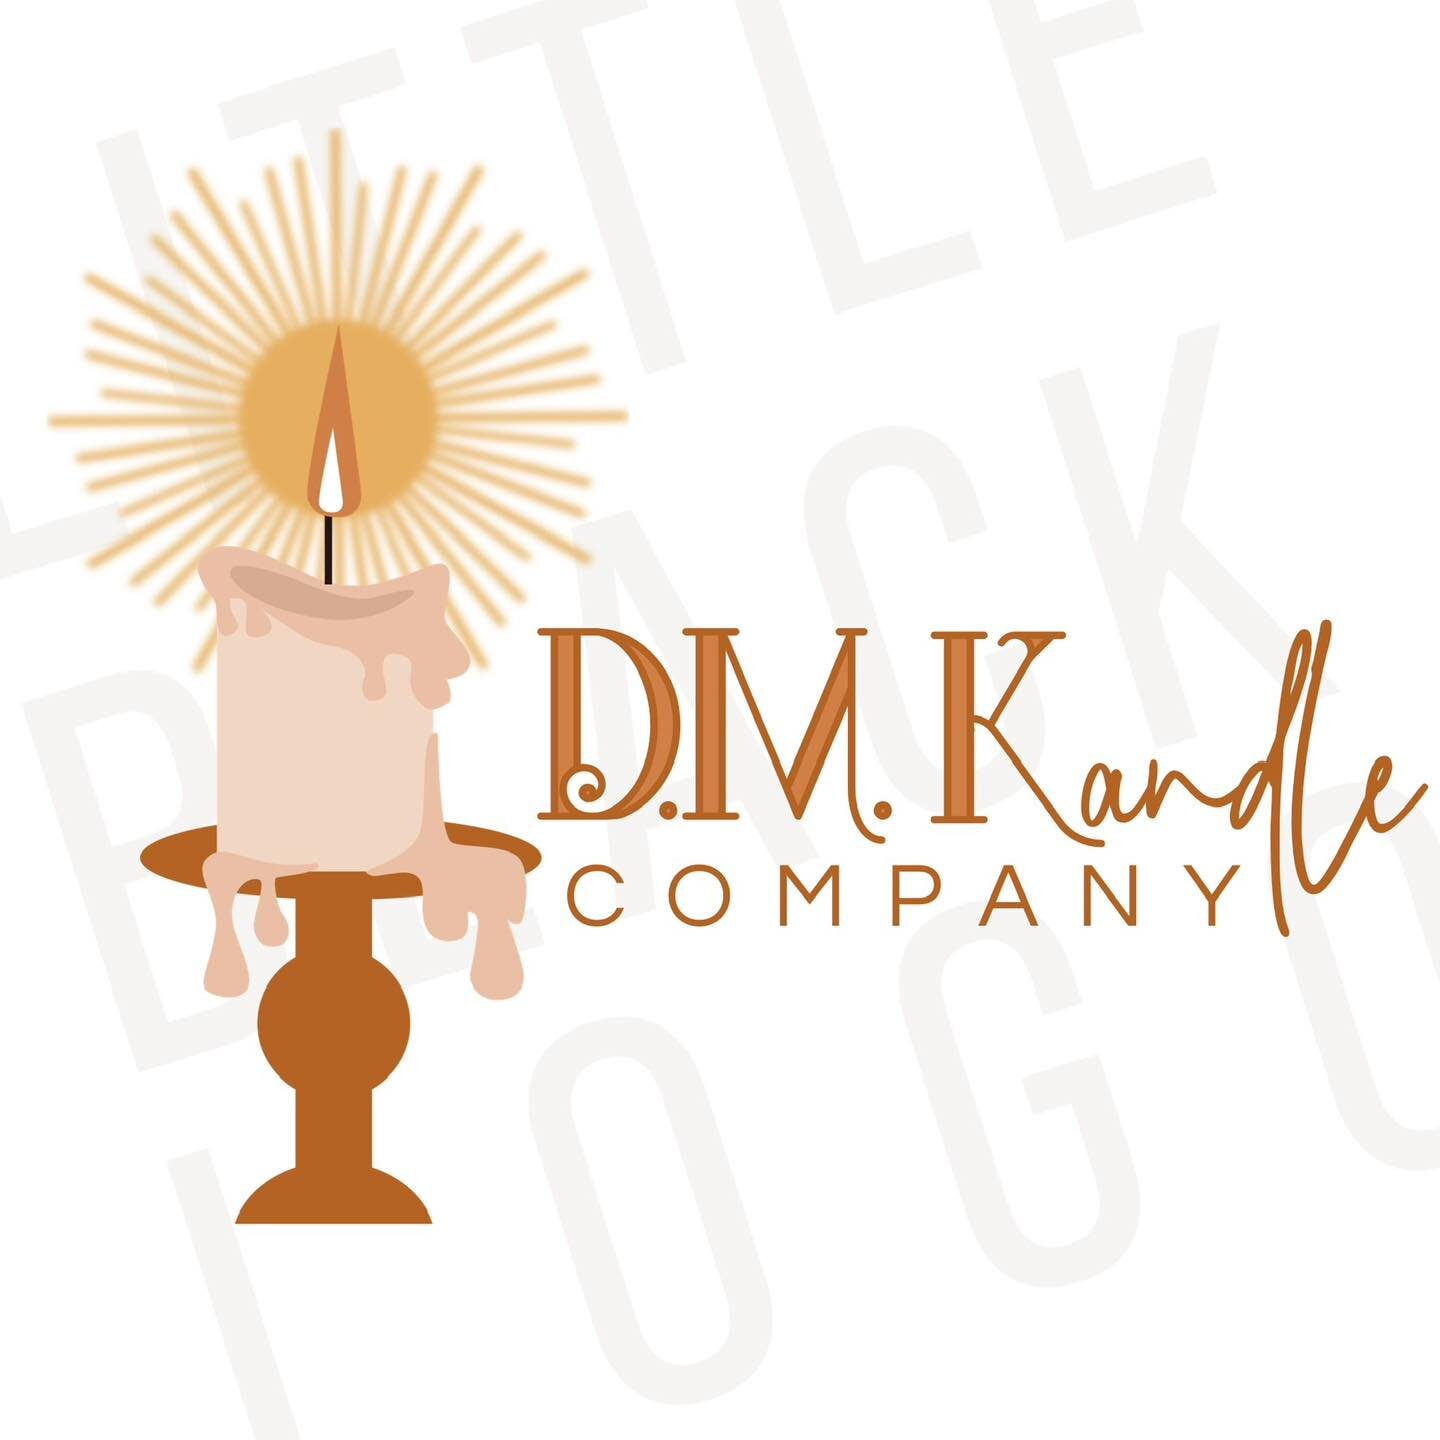 Our LAST #LogoRedesign before voting begins TONIGHT! 

I wanted to use warm colors for this brand. There is just something about a candle that was warm and cozy and inviting! These rich warm tones help set that mood. 

These colors plus the fun and e